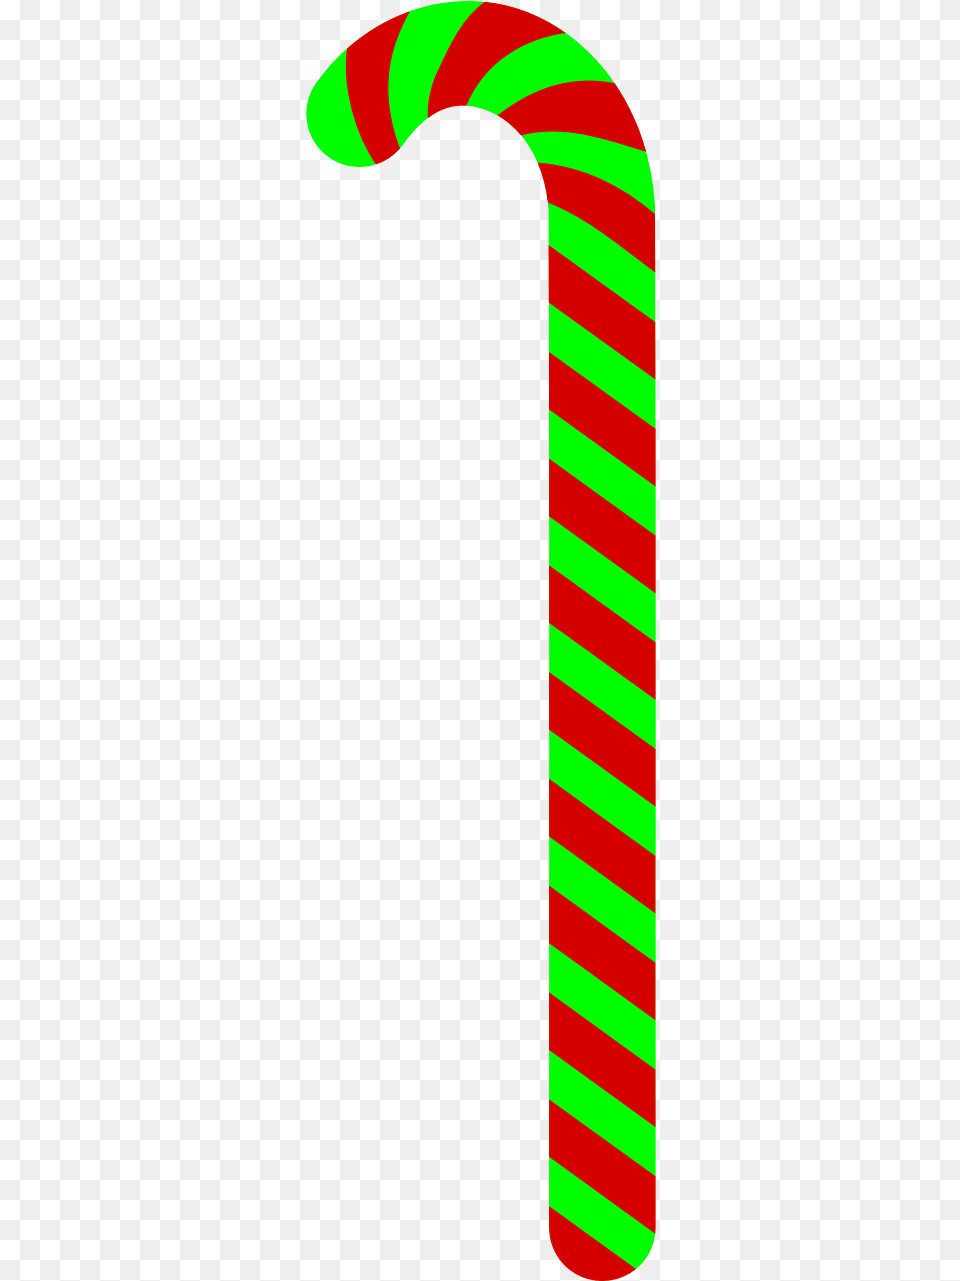 Green Candy Cane, Stick, Food, Sweets Png Image